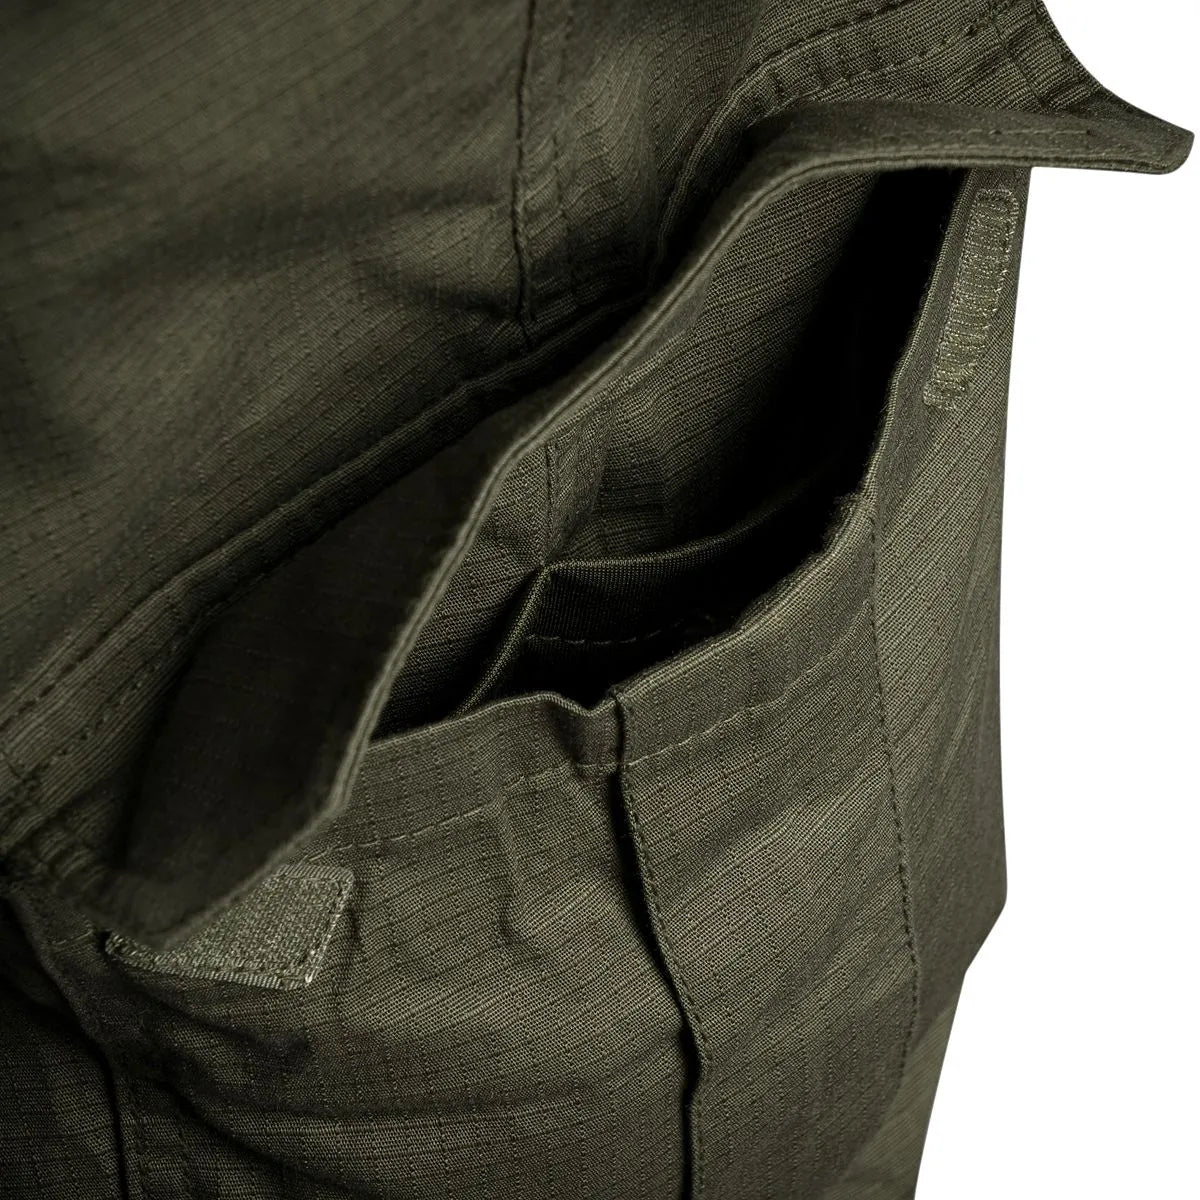 Stoirm Tactical Trousers - Olive